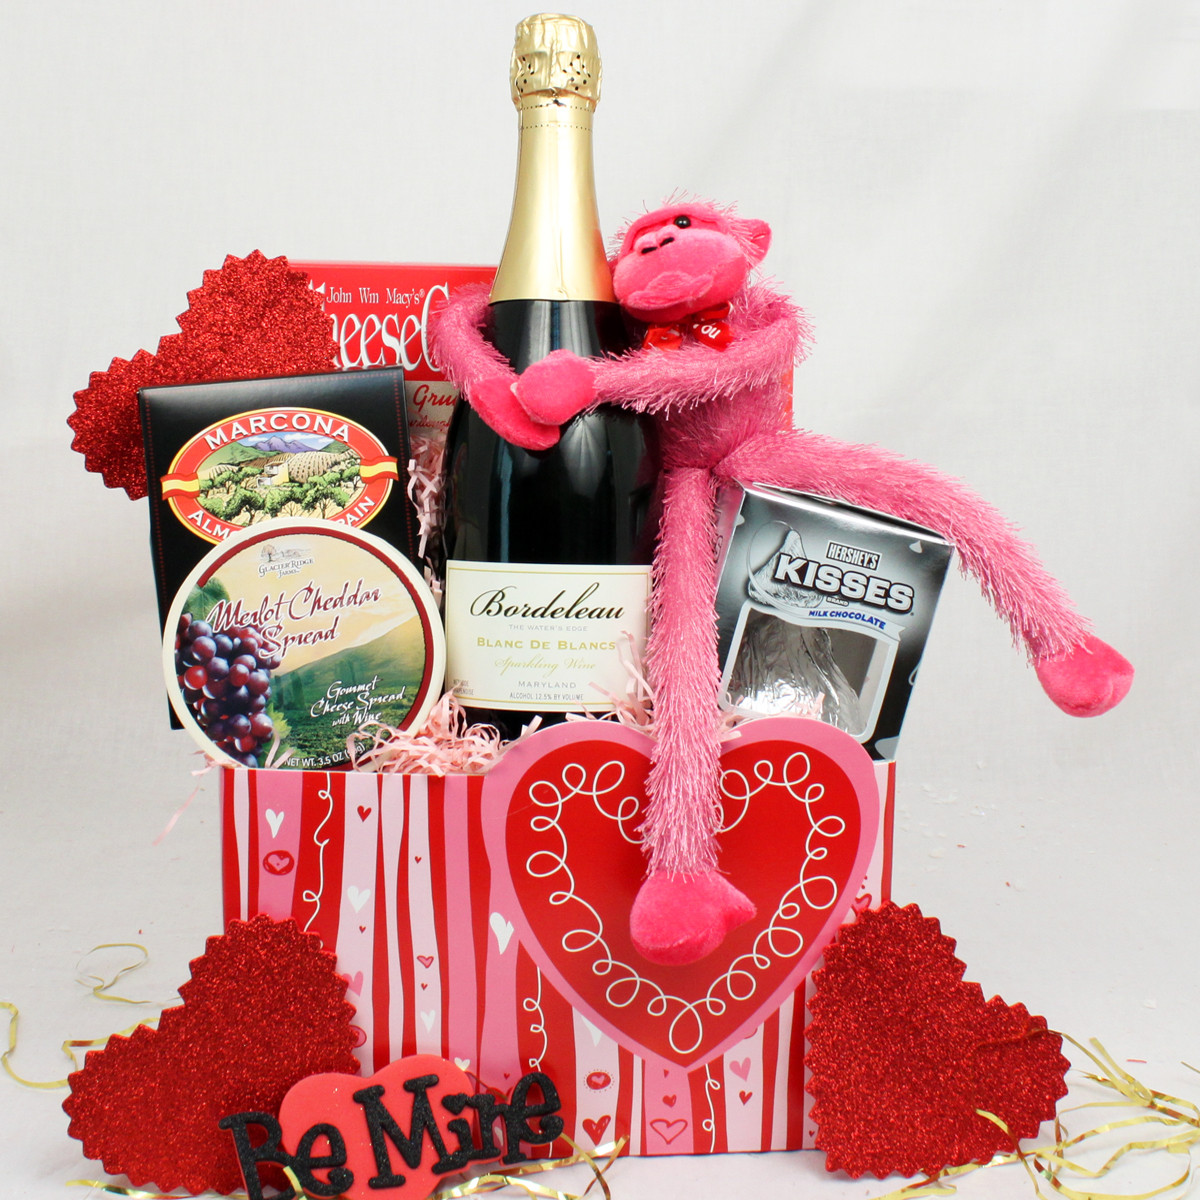 Creative Valentines Day Gifts
 Creative and Thoughtful Valentine’s Day Gifts for Her